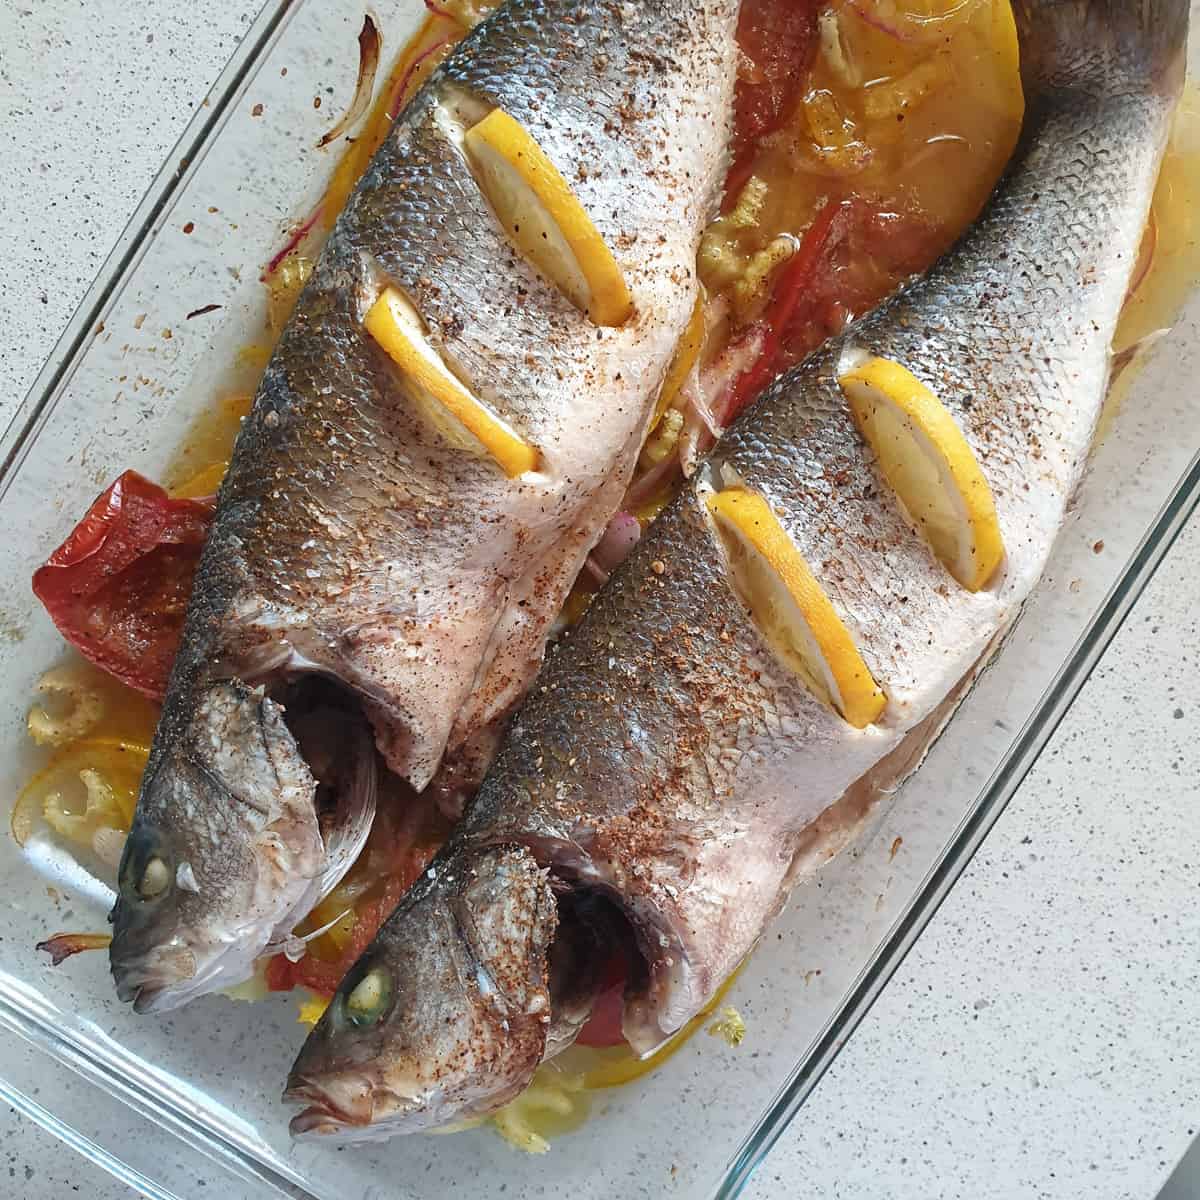 Baked gilt head bream in a clear serving dish with sliced lemons.